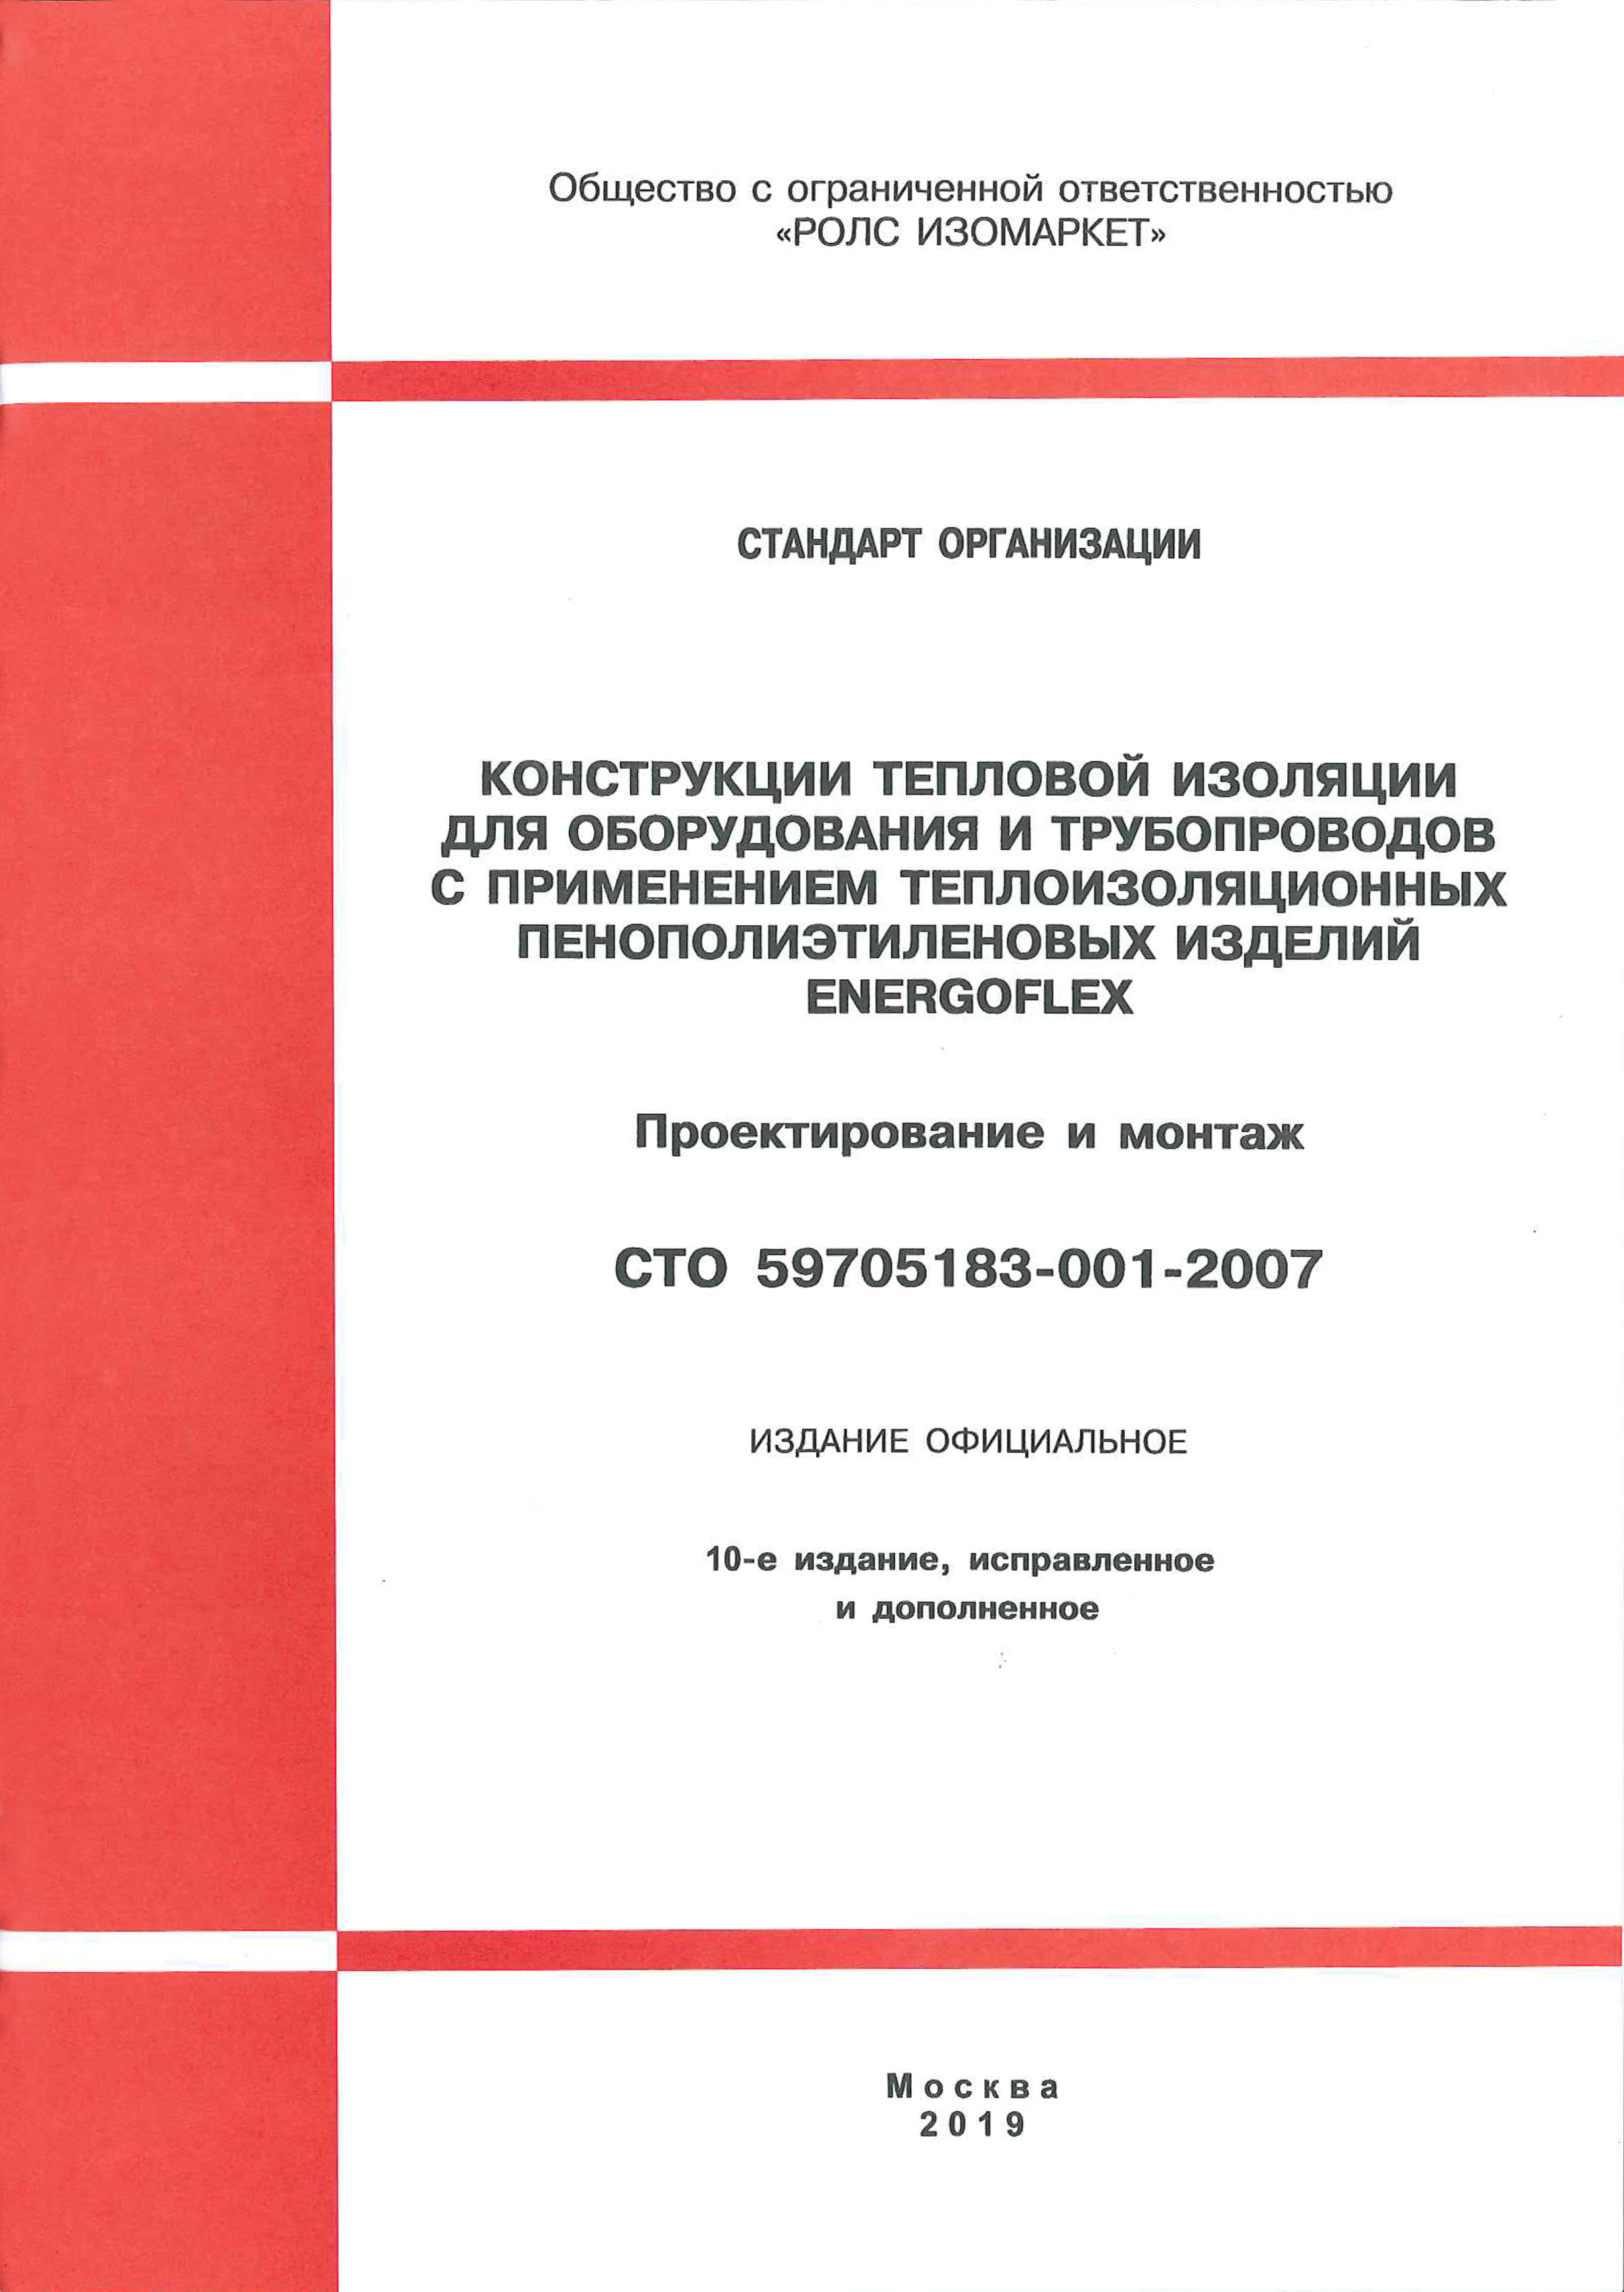 STO 59705183-001-2007 «Constructions of insulation for the equipment and pipelines with the use of Energoflex® insulating products. Engineering and installation»